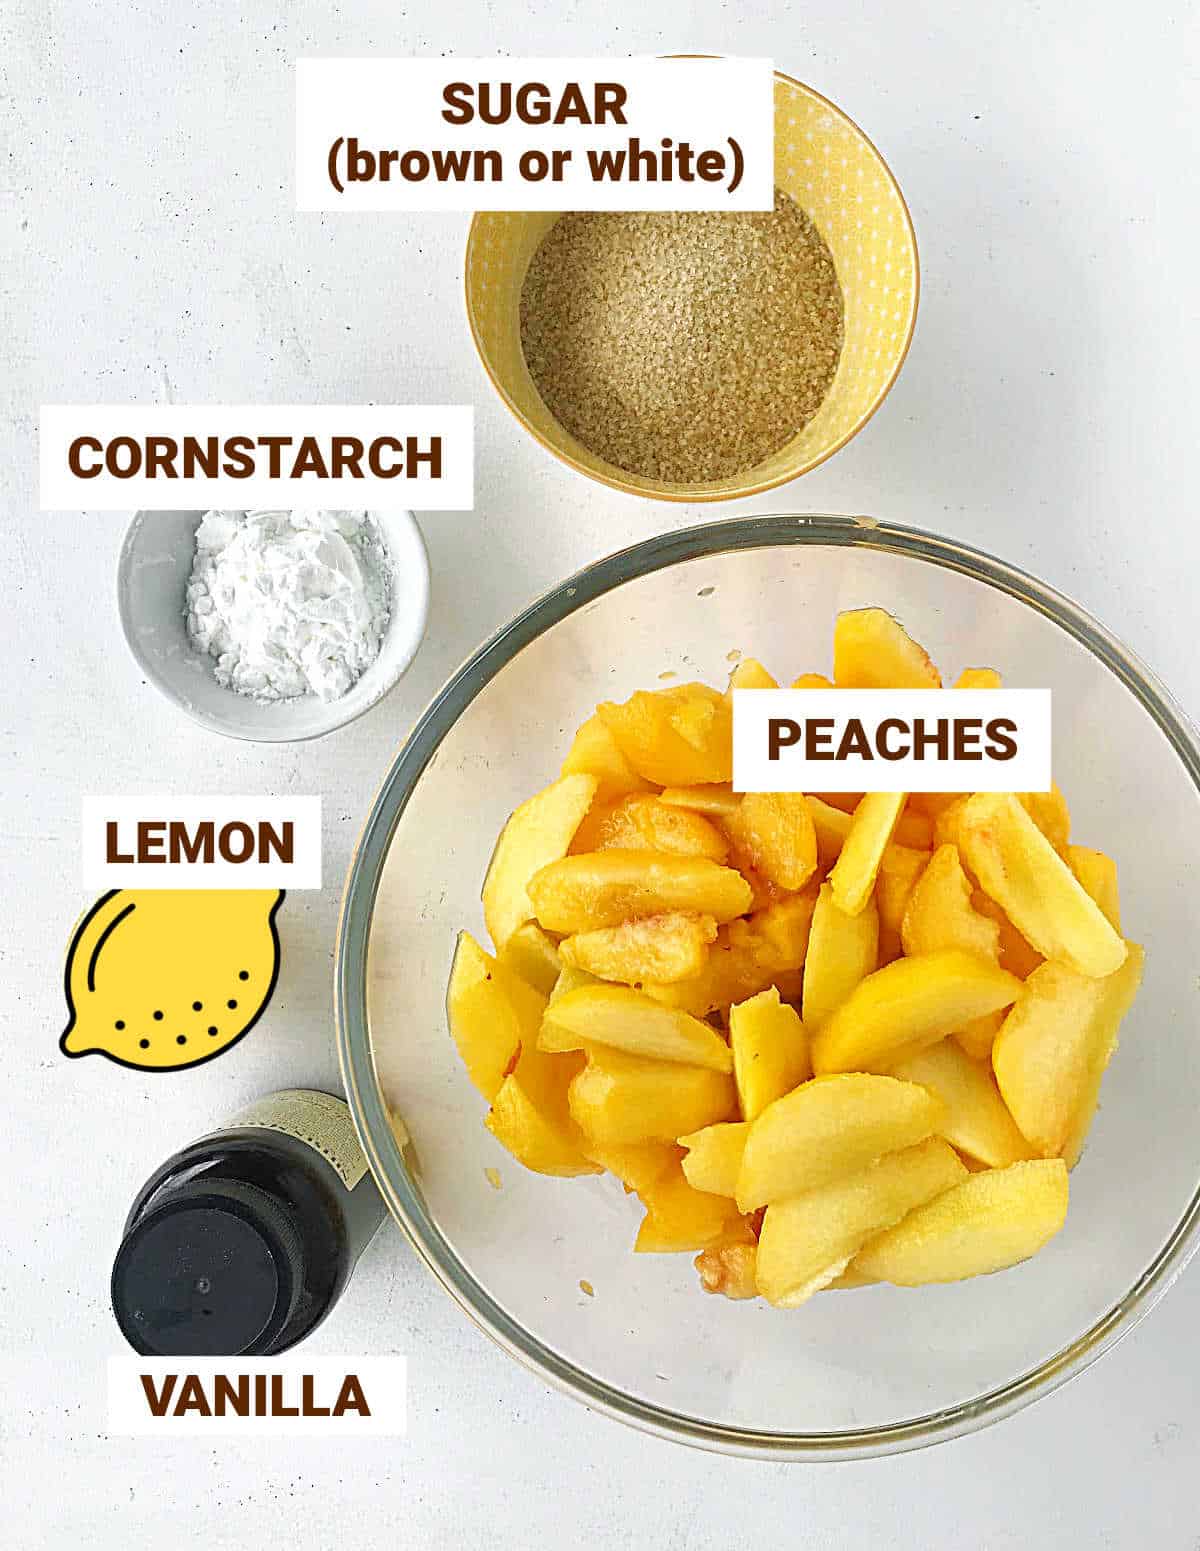 Ingredients for peach pie filling on white surface, including vanilla, lemon, cornstarch; brown text overlay.